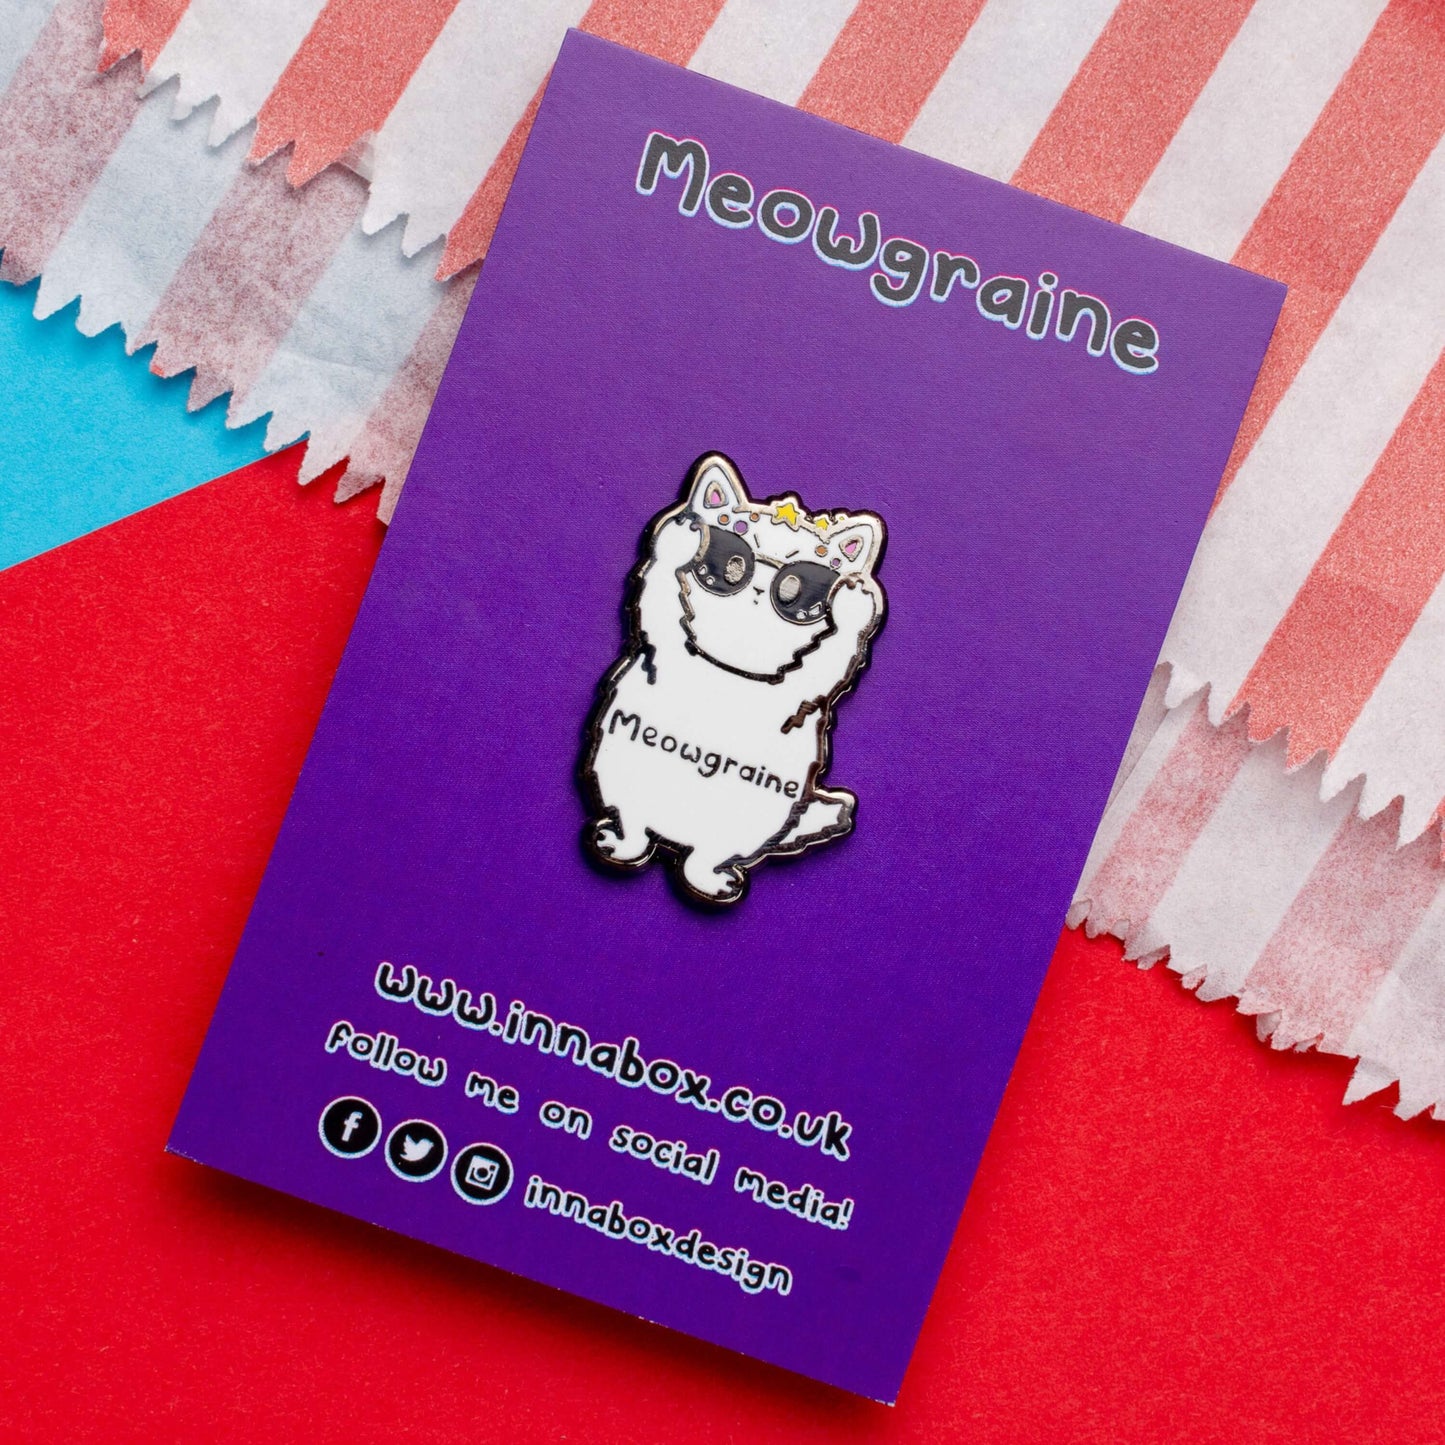 The Meowgraine Cat Enamel Pin - Migraine on purple backing card laid on a red and blue background. A white stressed cat clutching a pair of black sunglasses to its eyes with multicoloured spots and stars over its head, across its middle reads 'meowgraine'. The hand drawn design is raising awareness for migraines and headaches.